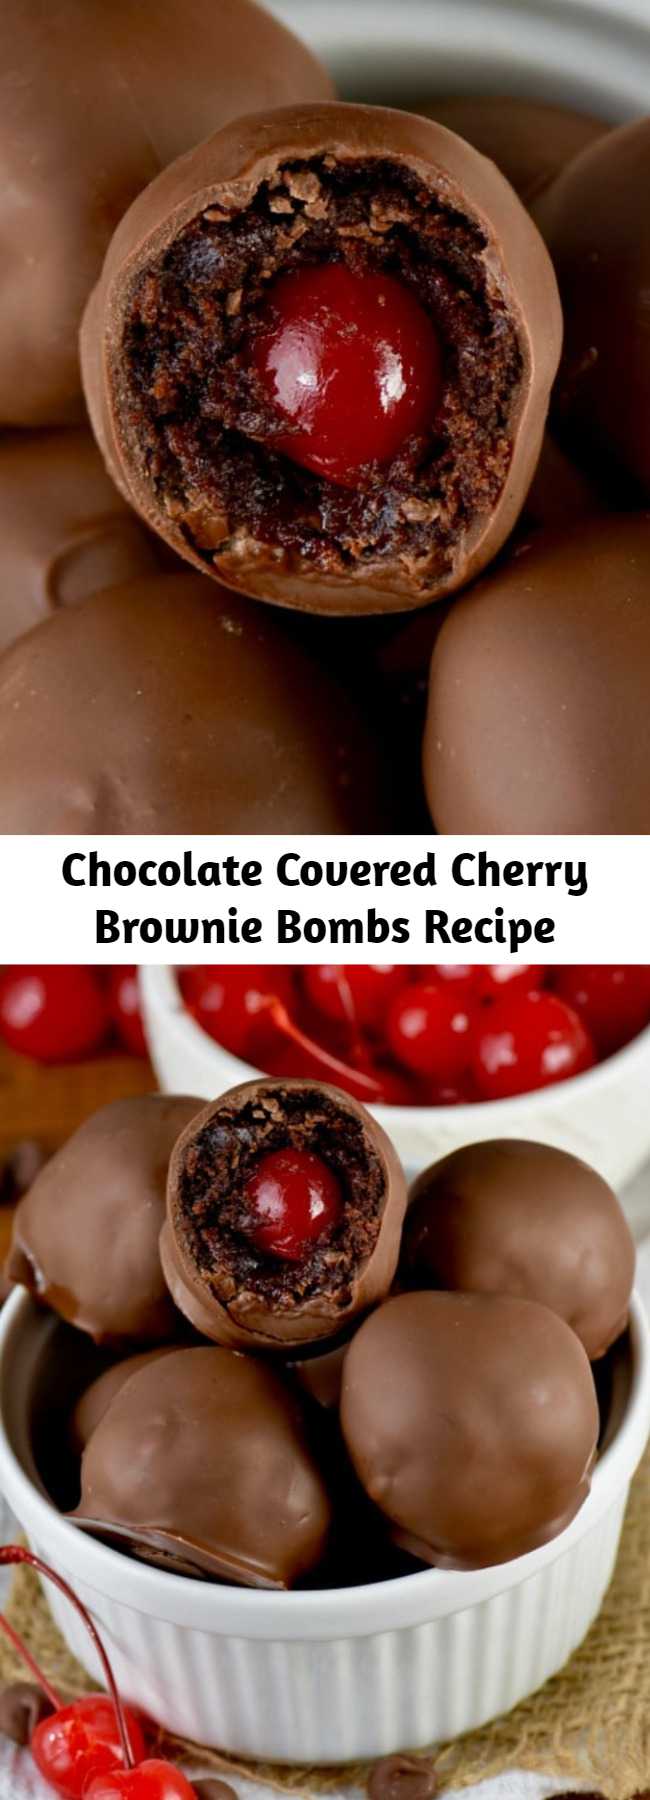 Chocolate Covered Cherry Brownie Bombs Recipe - These Chocolate Covered Cherry Brownie Bombs are delicious bites of brownie surrounding cherries and then dipped in chocolate! These tiny little truffles of amazingness are easy enough to make, but even easier to eat!